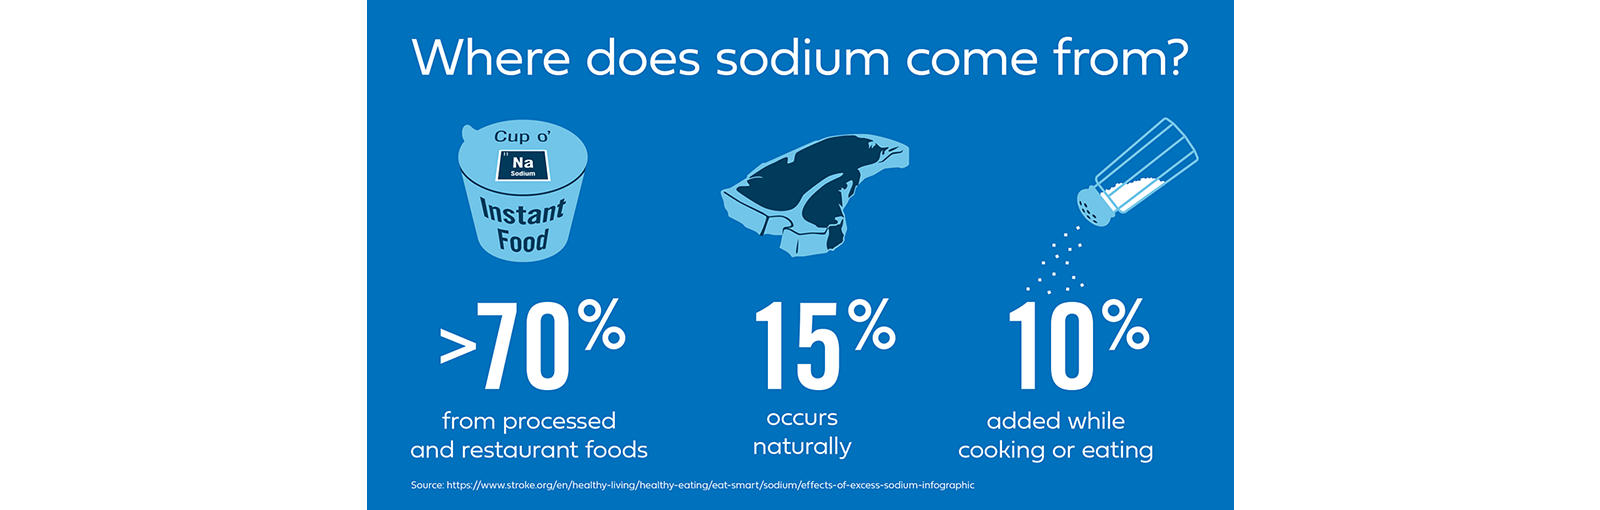 Where does sodium come from infographic